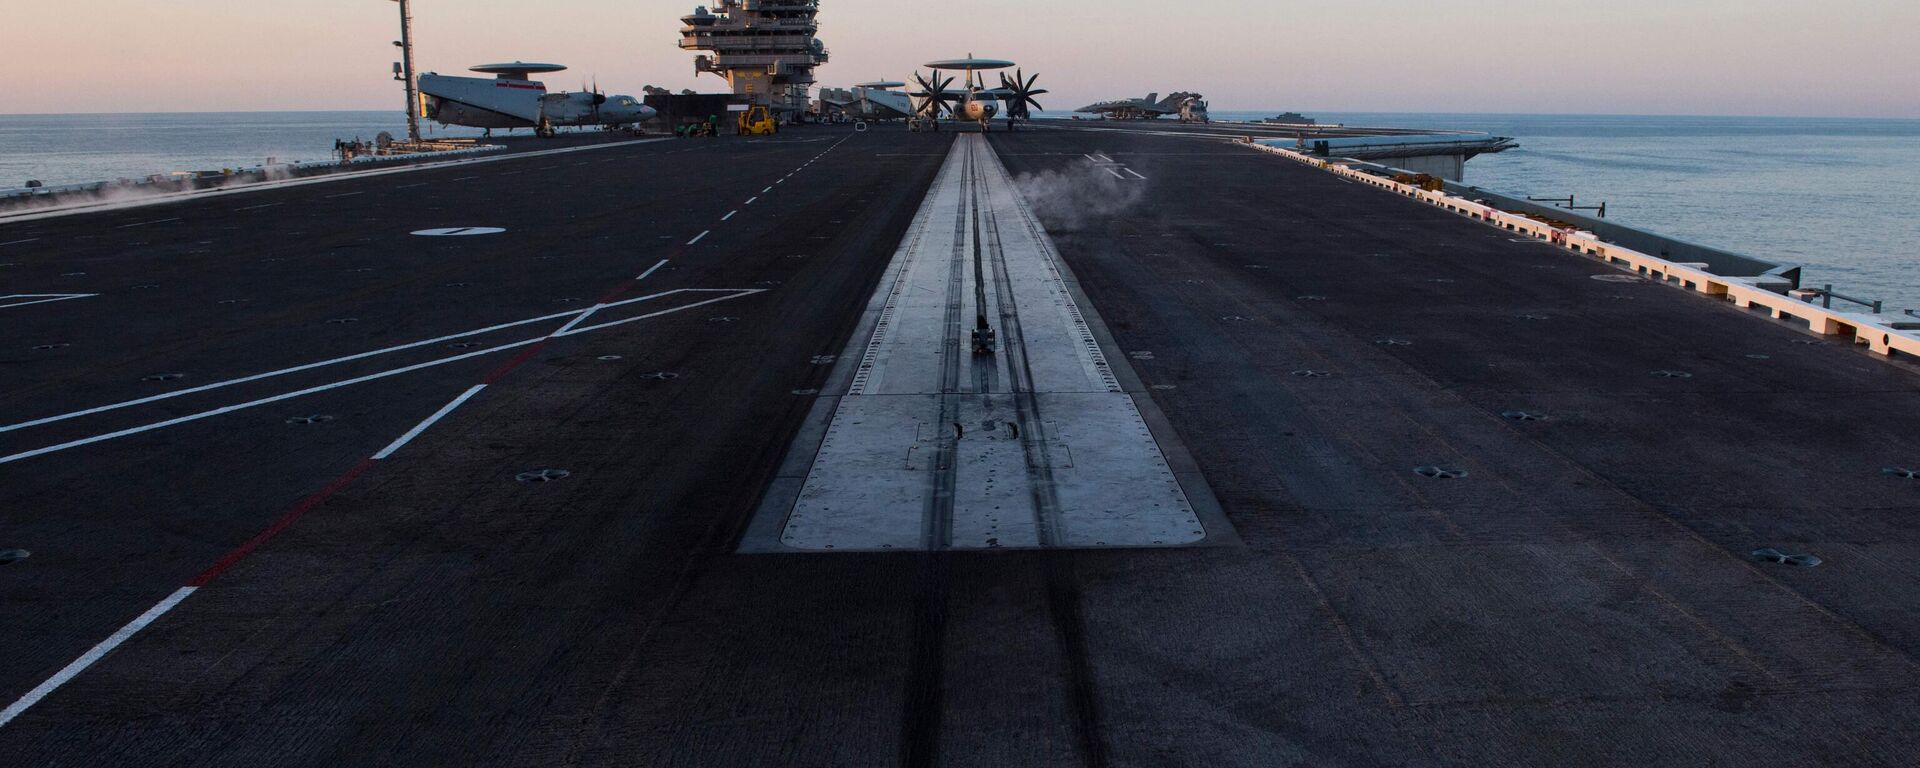 The end of the catapult runway is seen early in the morning on the deck of the the USS George H.W. Bush aircraft carrier during a deployment. File photo. - Sputnik International, 1920, 04.04.2023